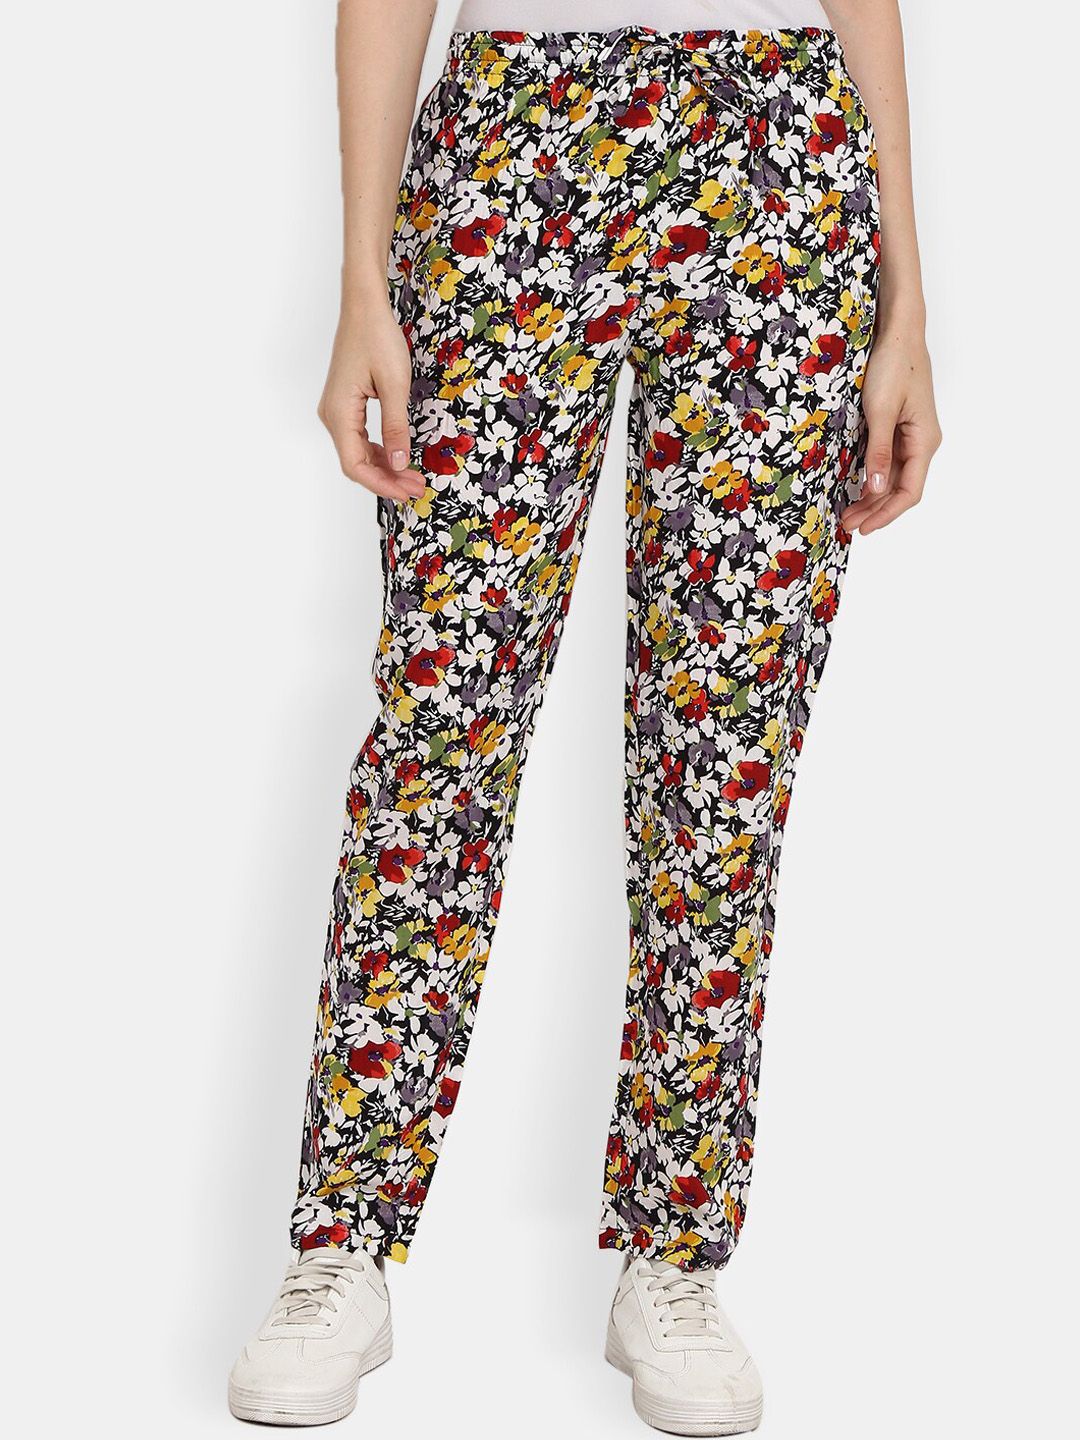 V-Mart Women Red & Black Floral Printed Lounge Pants Price in India